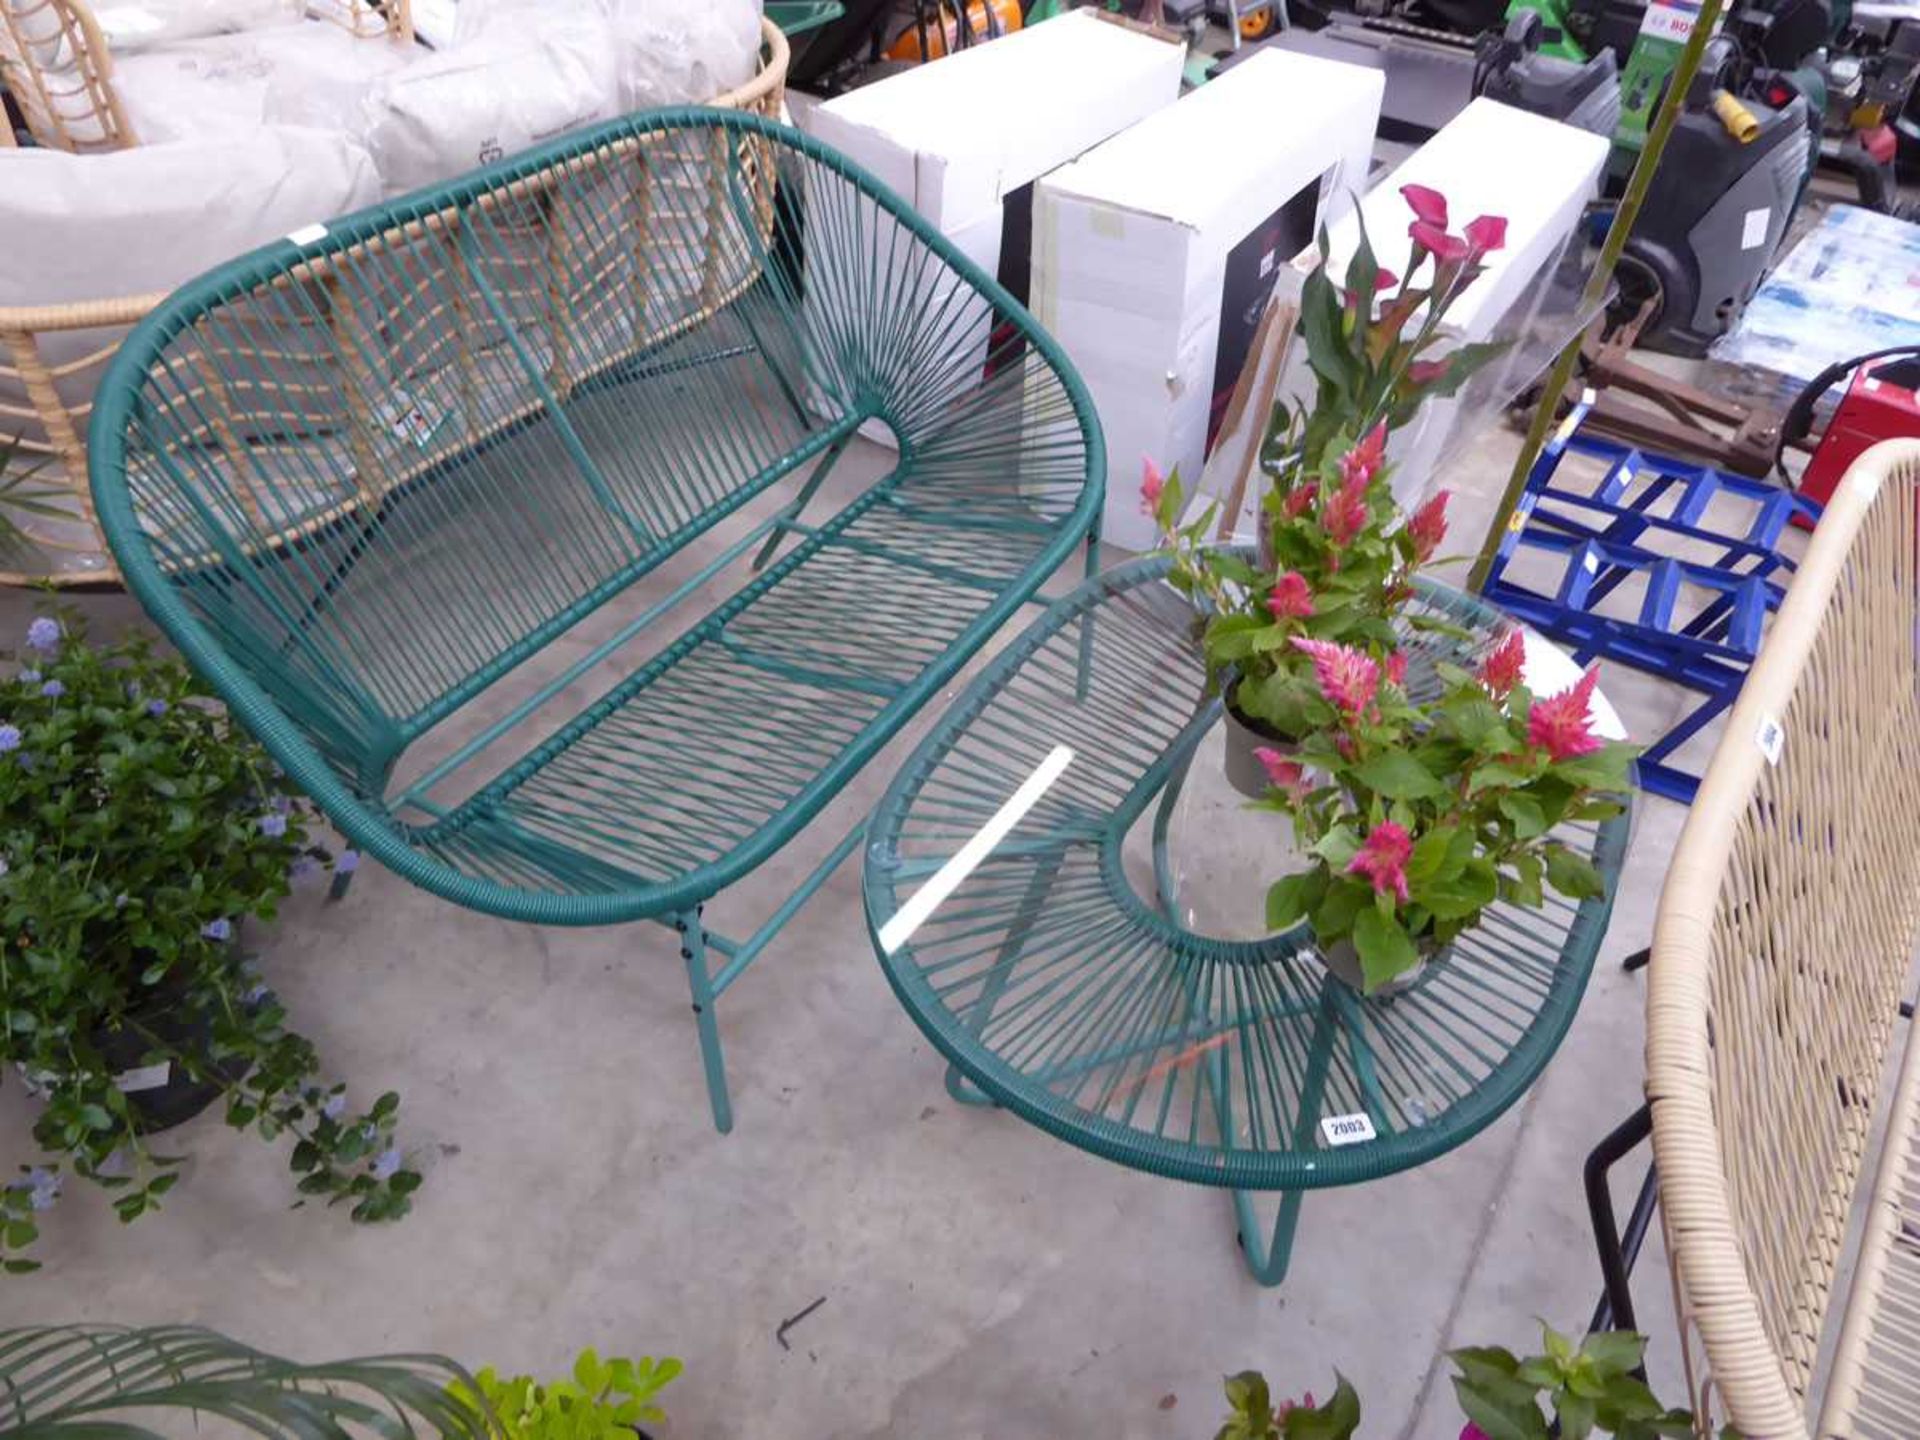 Green rope effect garden 2 seater sofa together with a matching glass top oval shape coffee table